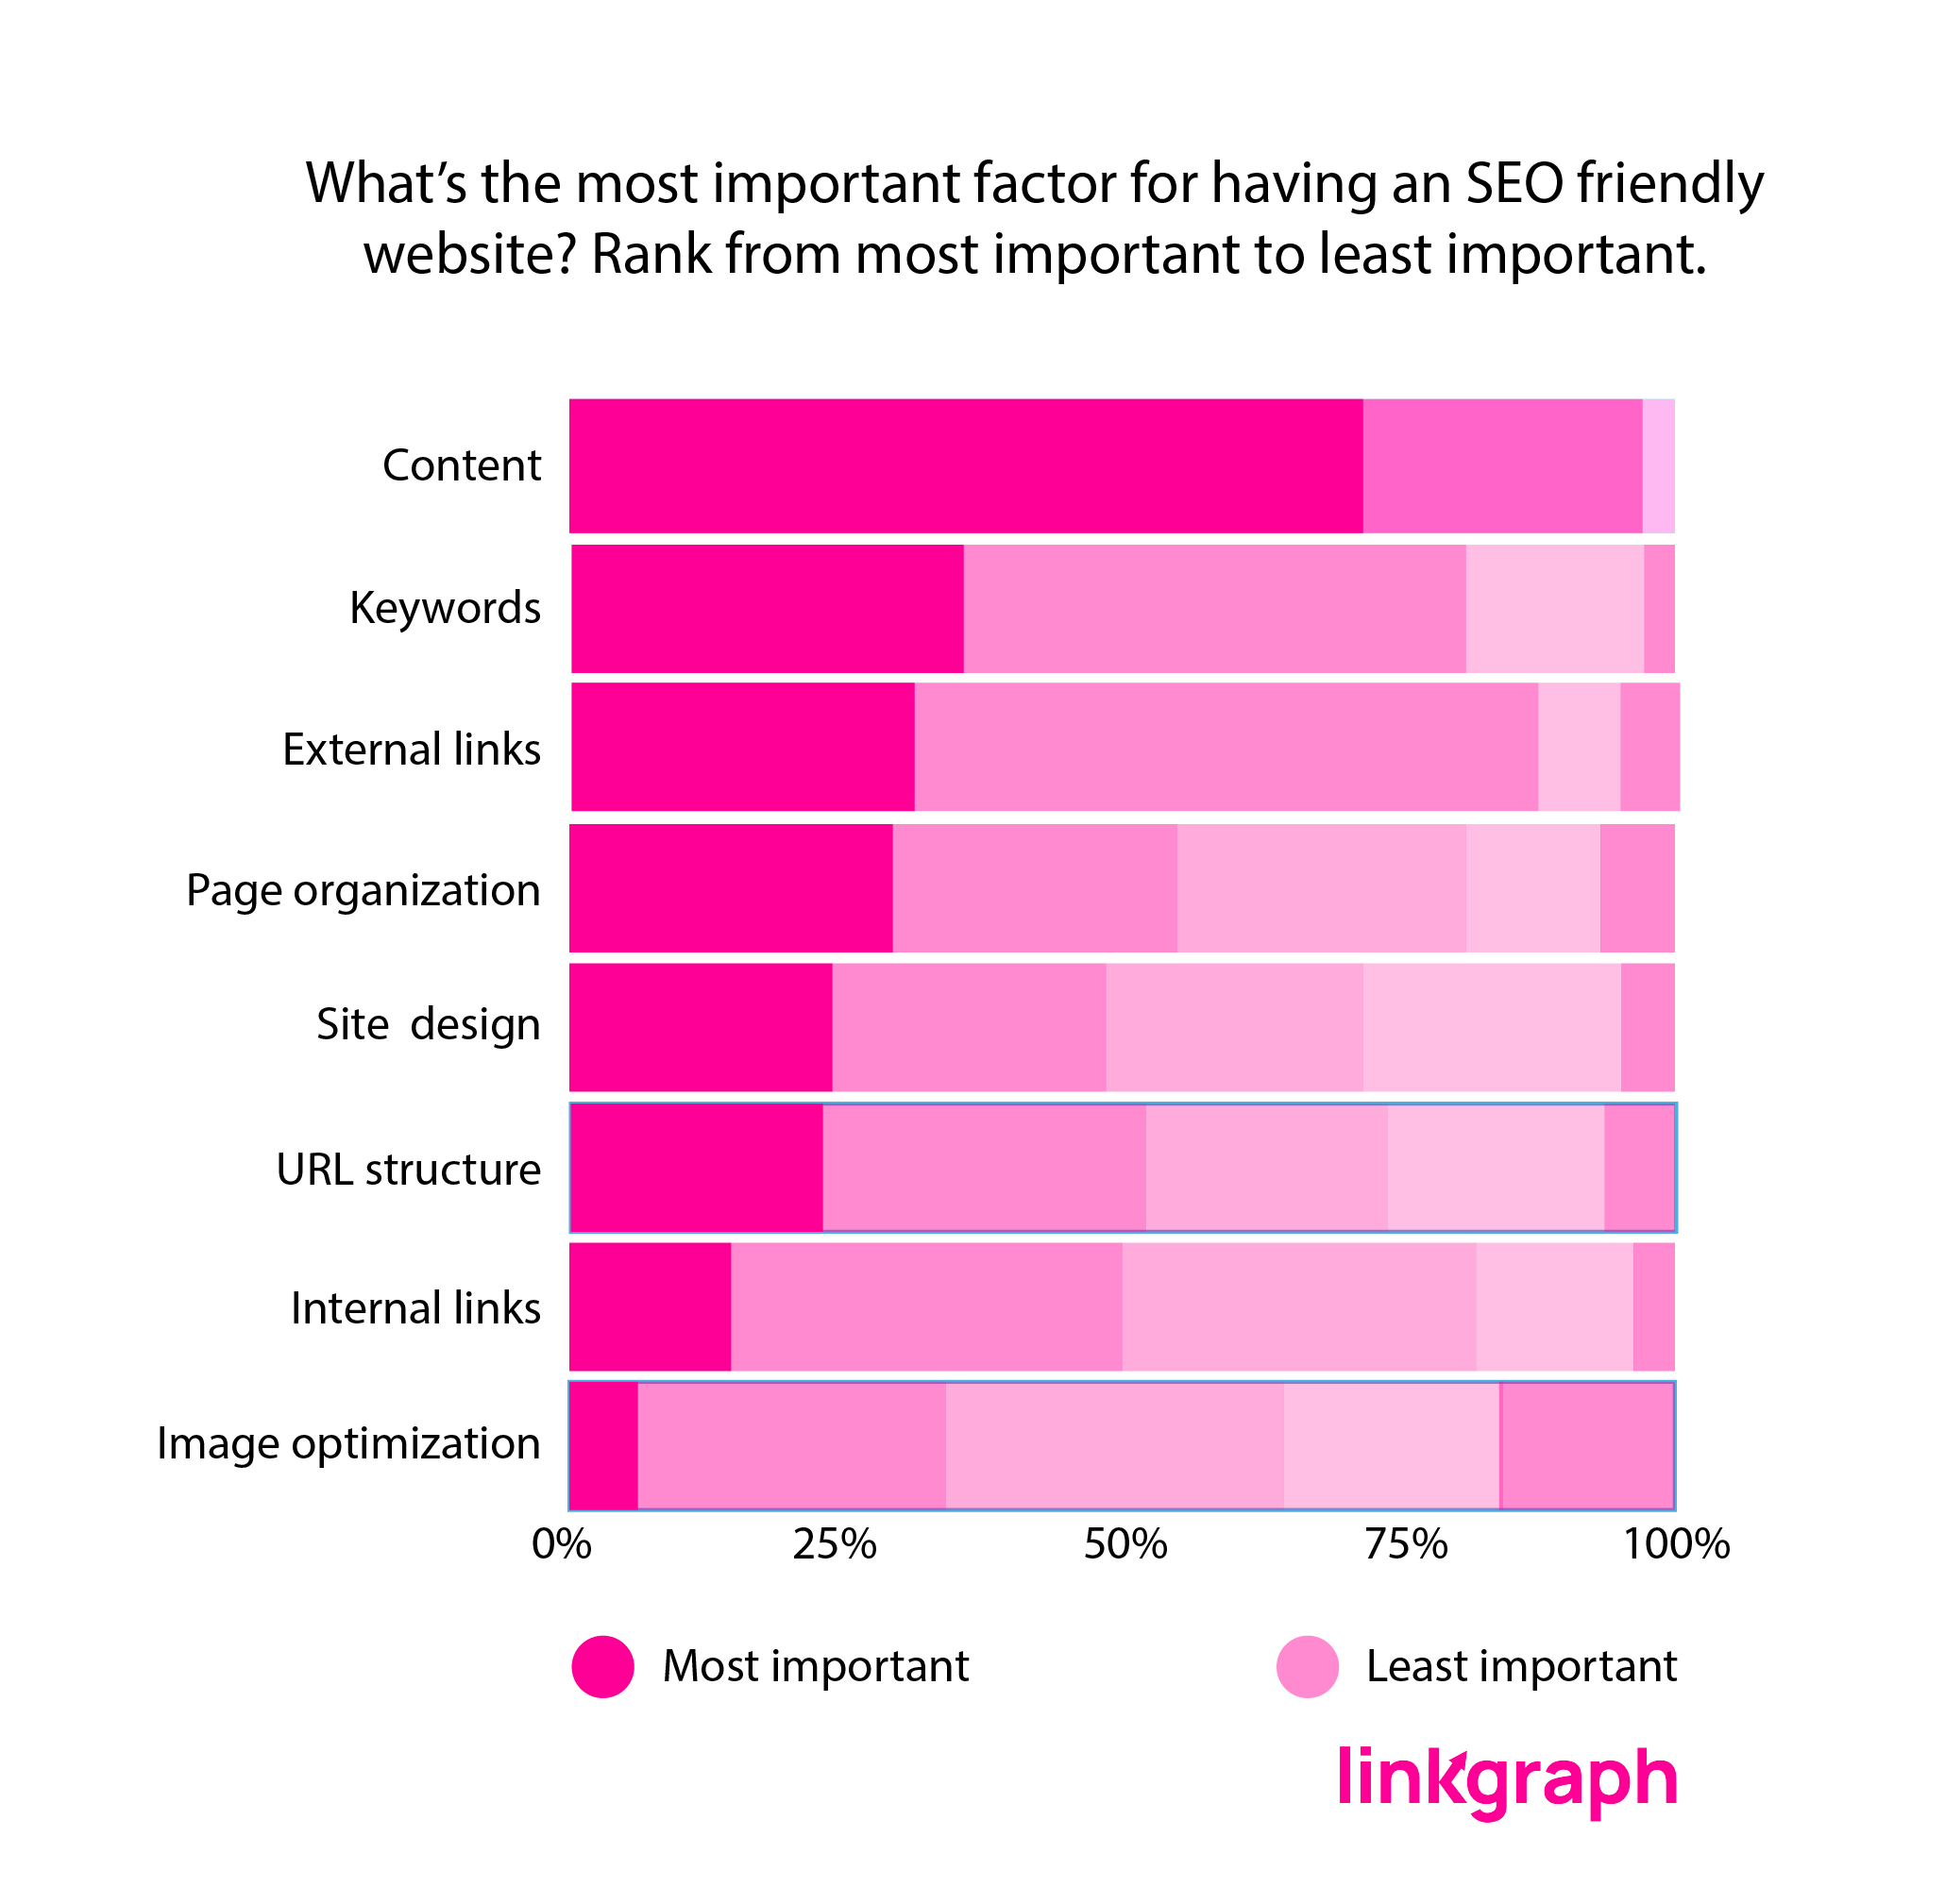 Bar graph charting the most important factors for having an SEO friendly website according to SEO professionals